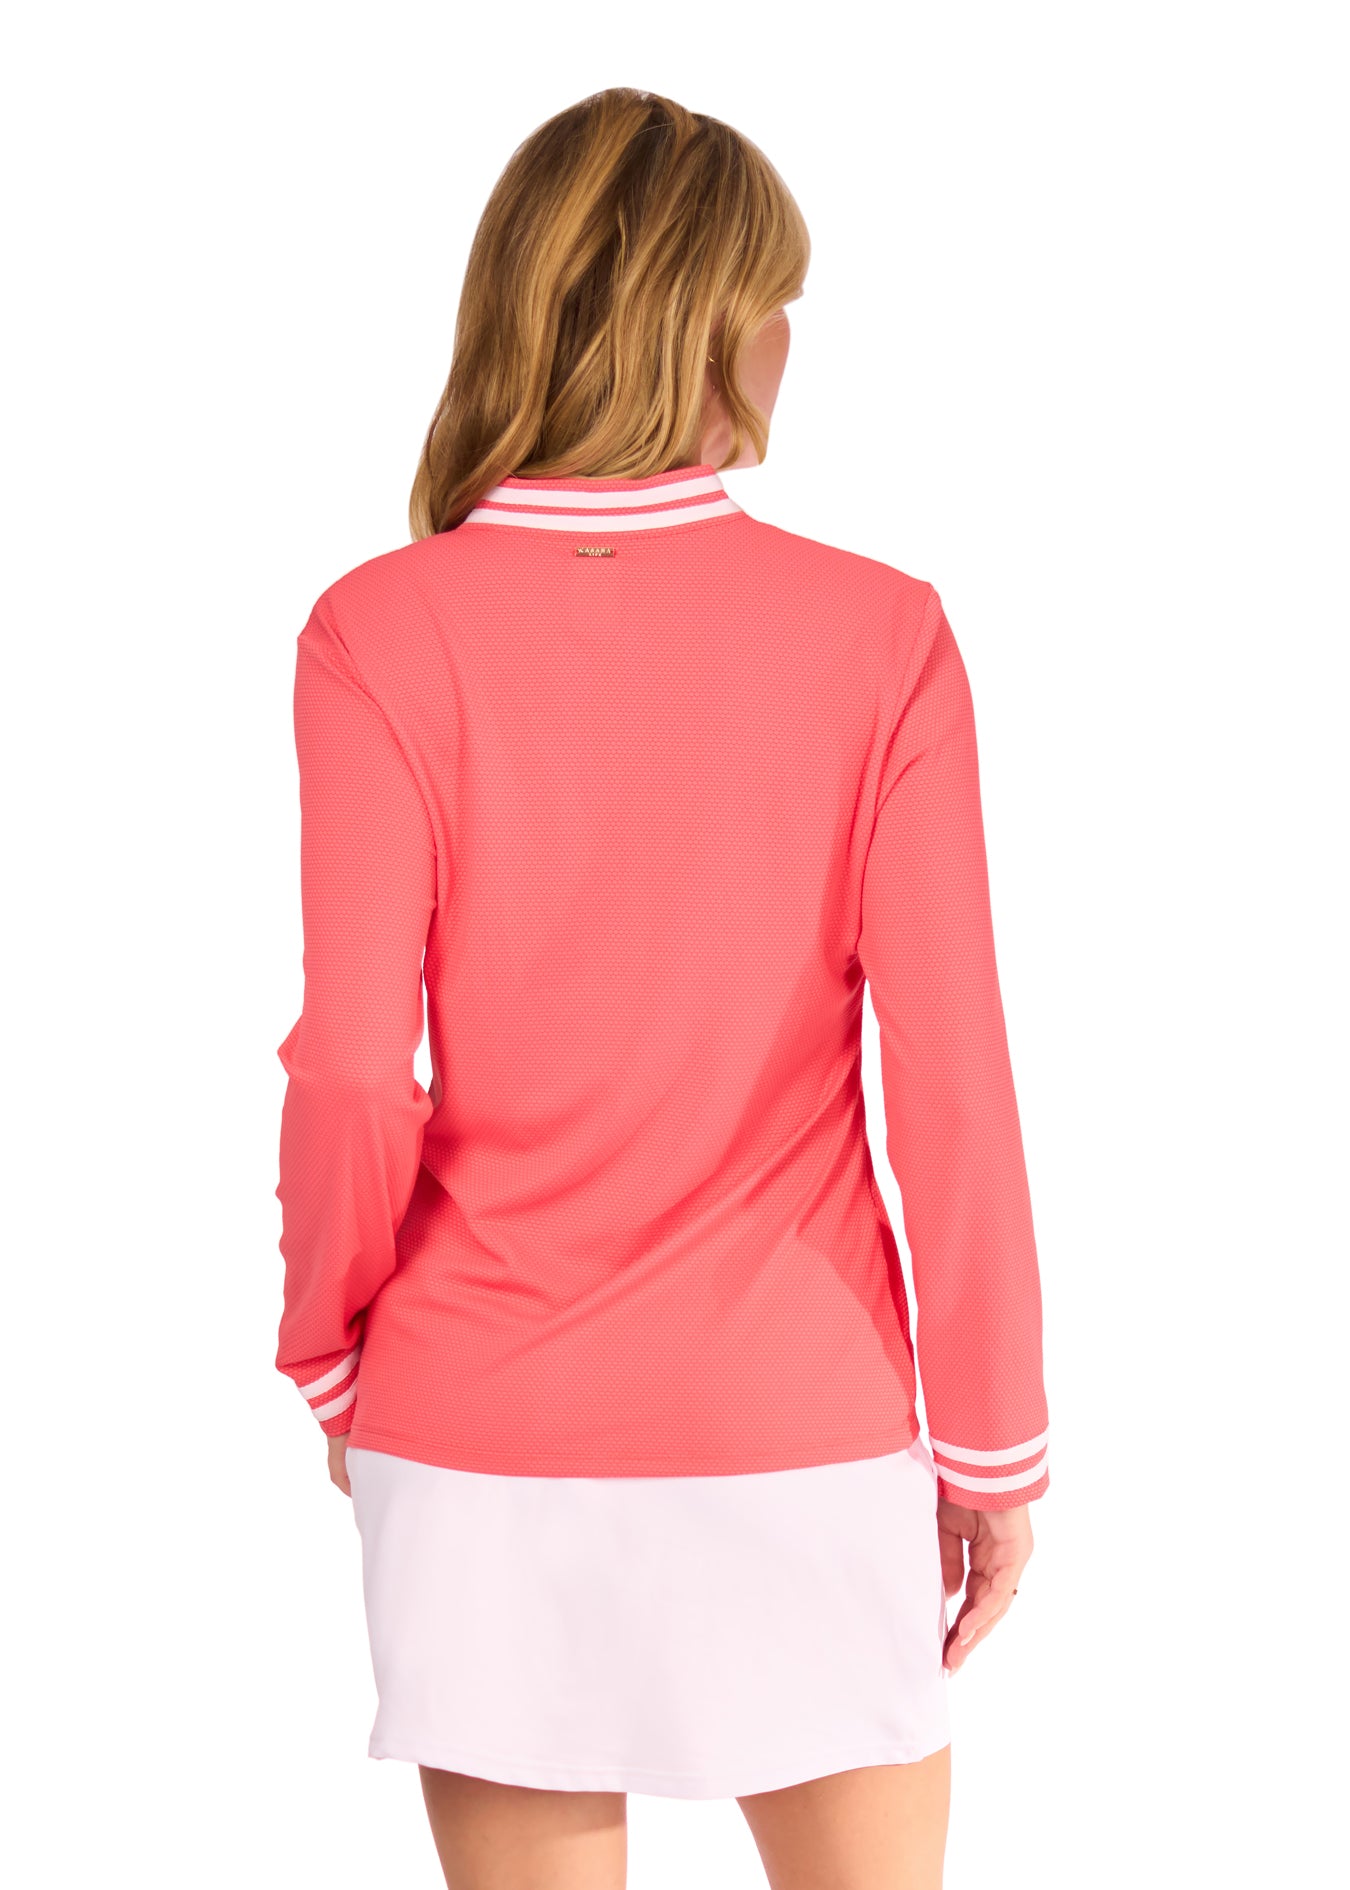 Back of Woman in Coral Collared Quarter Zip and White Skort